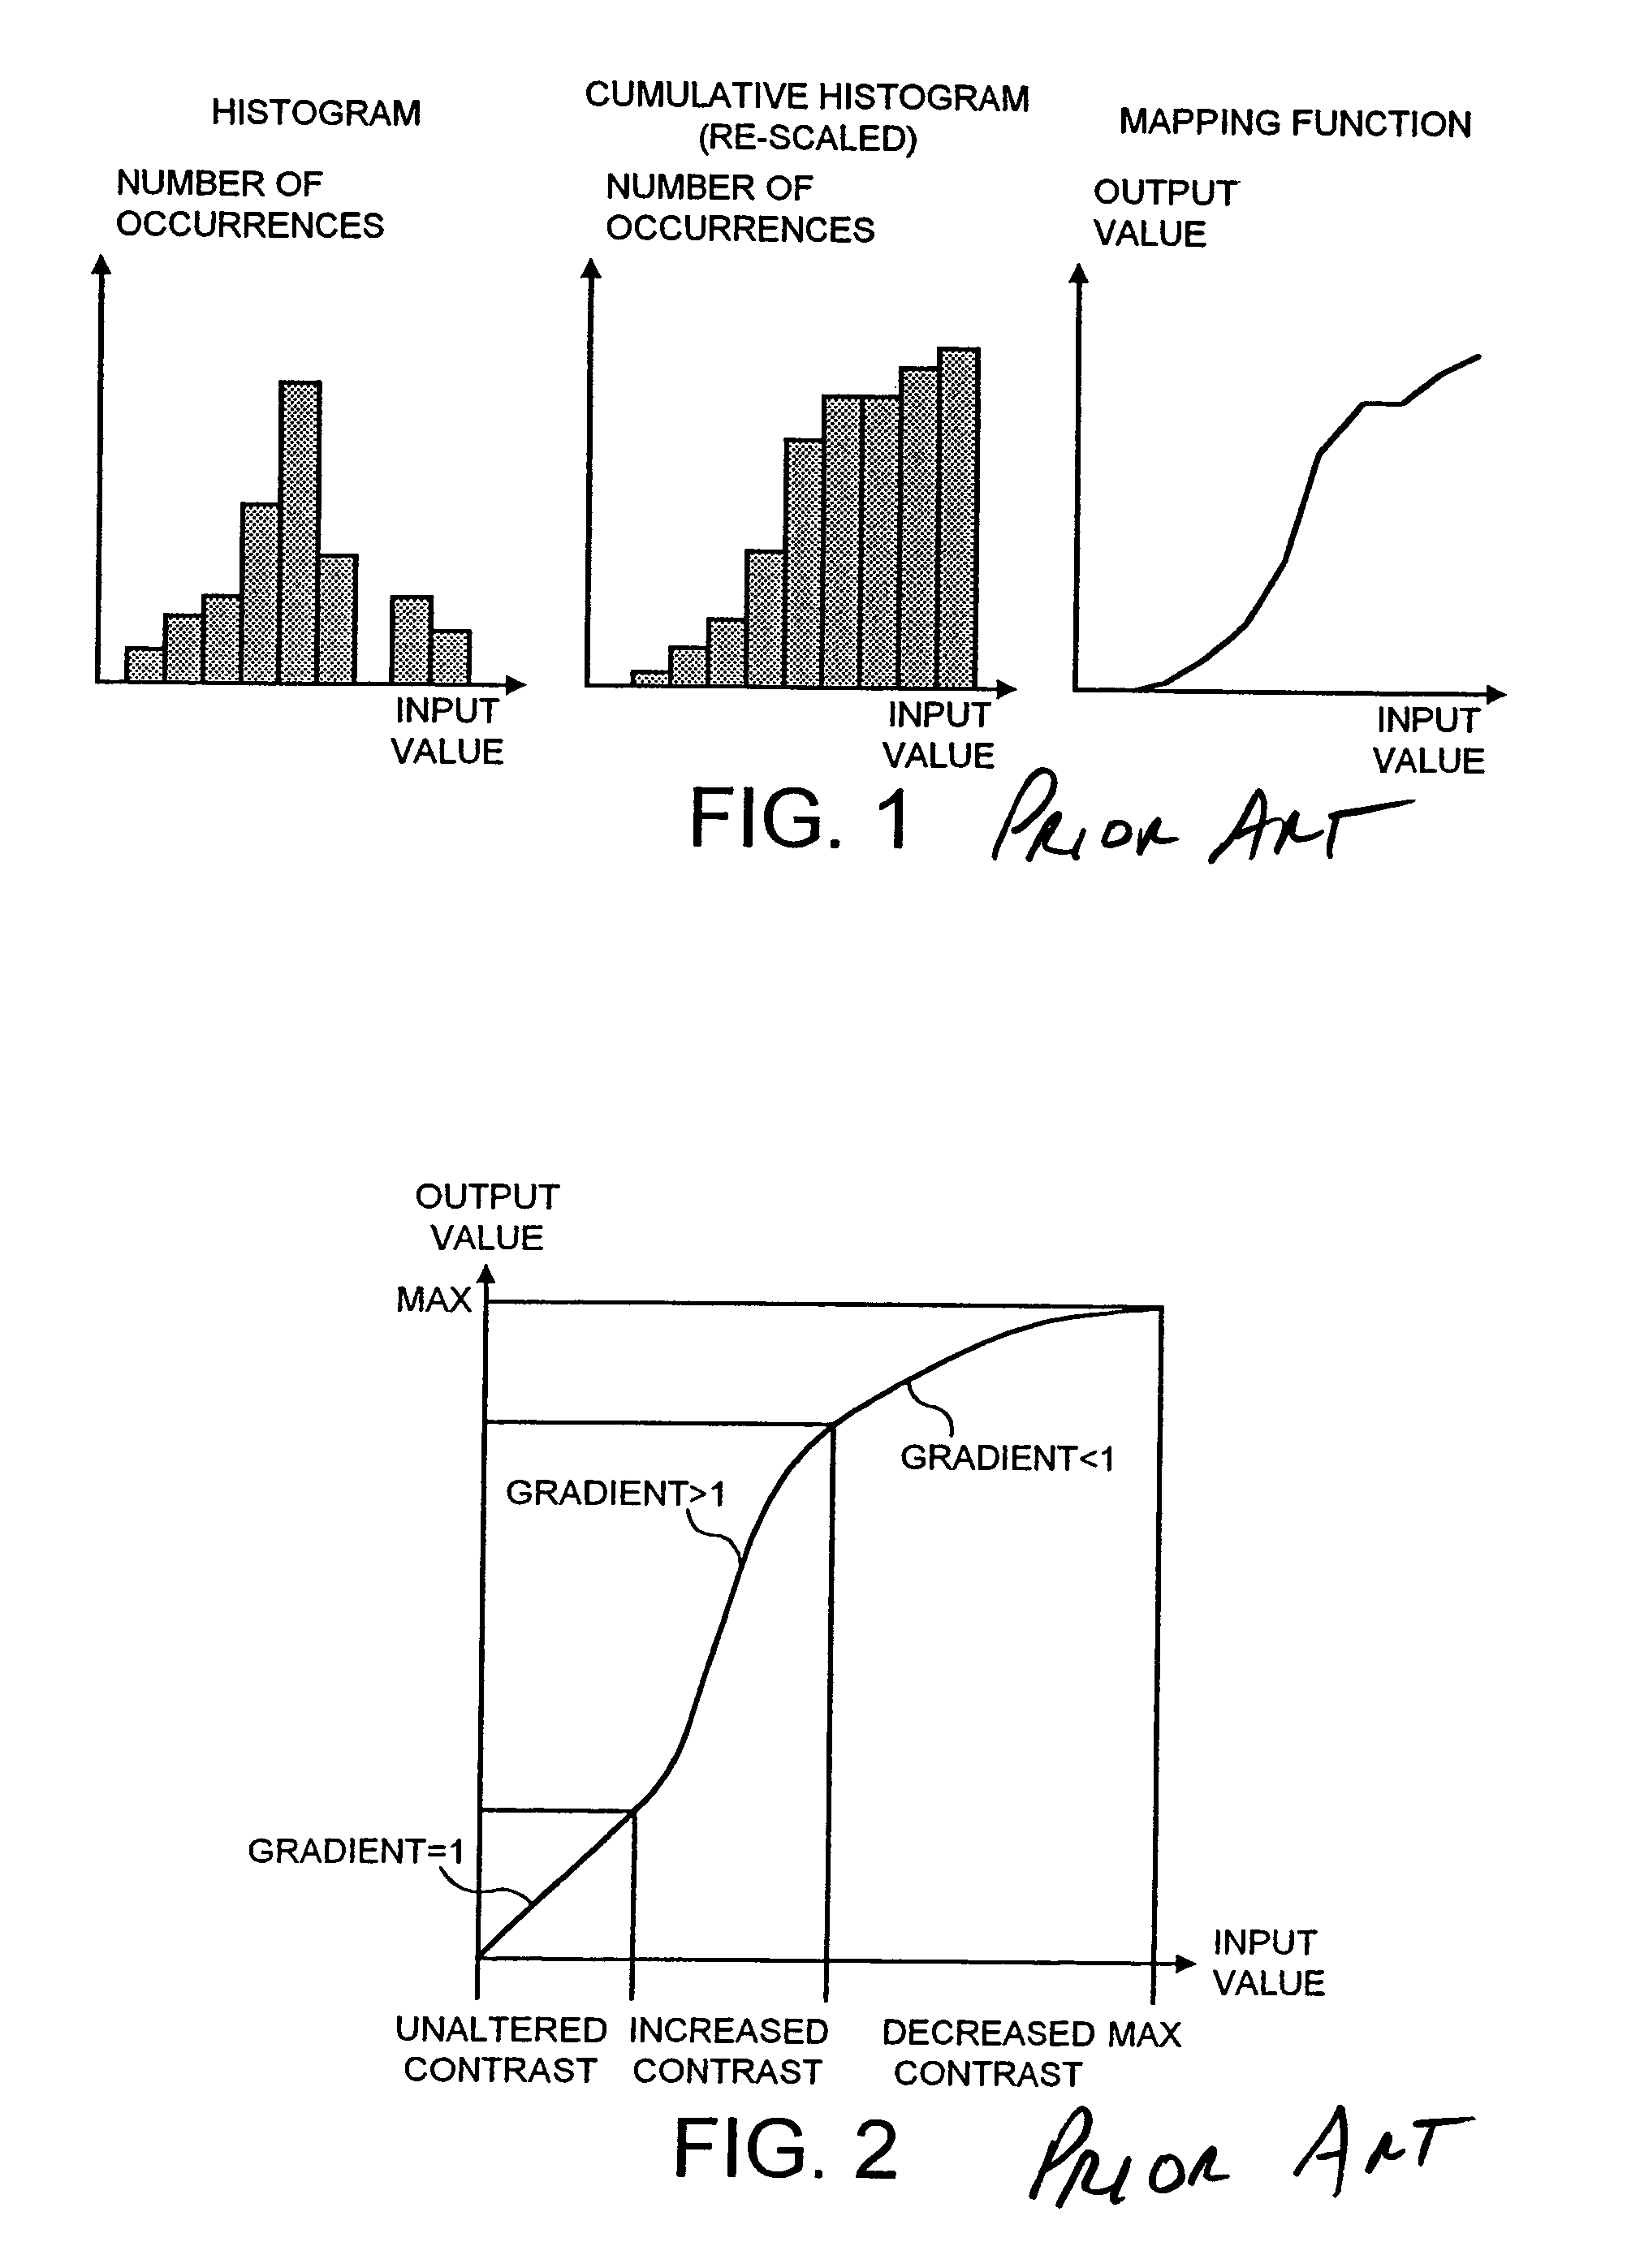 Method and apparatus for enhancing a digital image by applying an inverse histogram-based pixel mapping function to pixels of the digital image